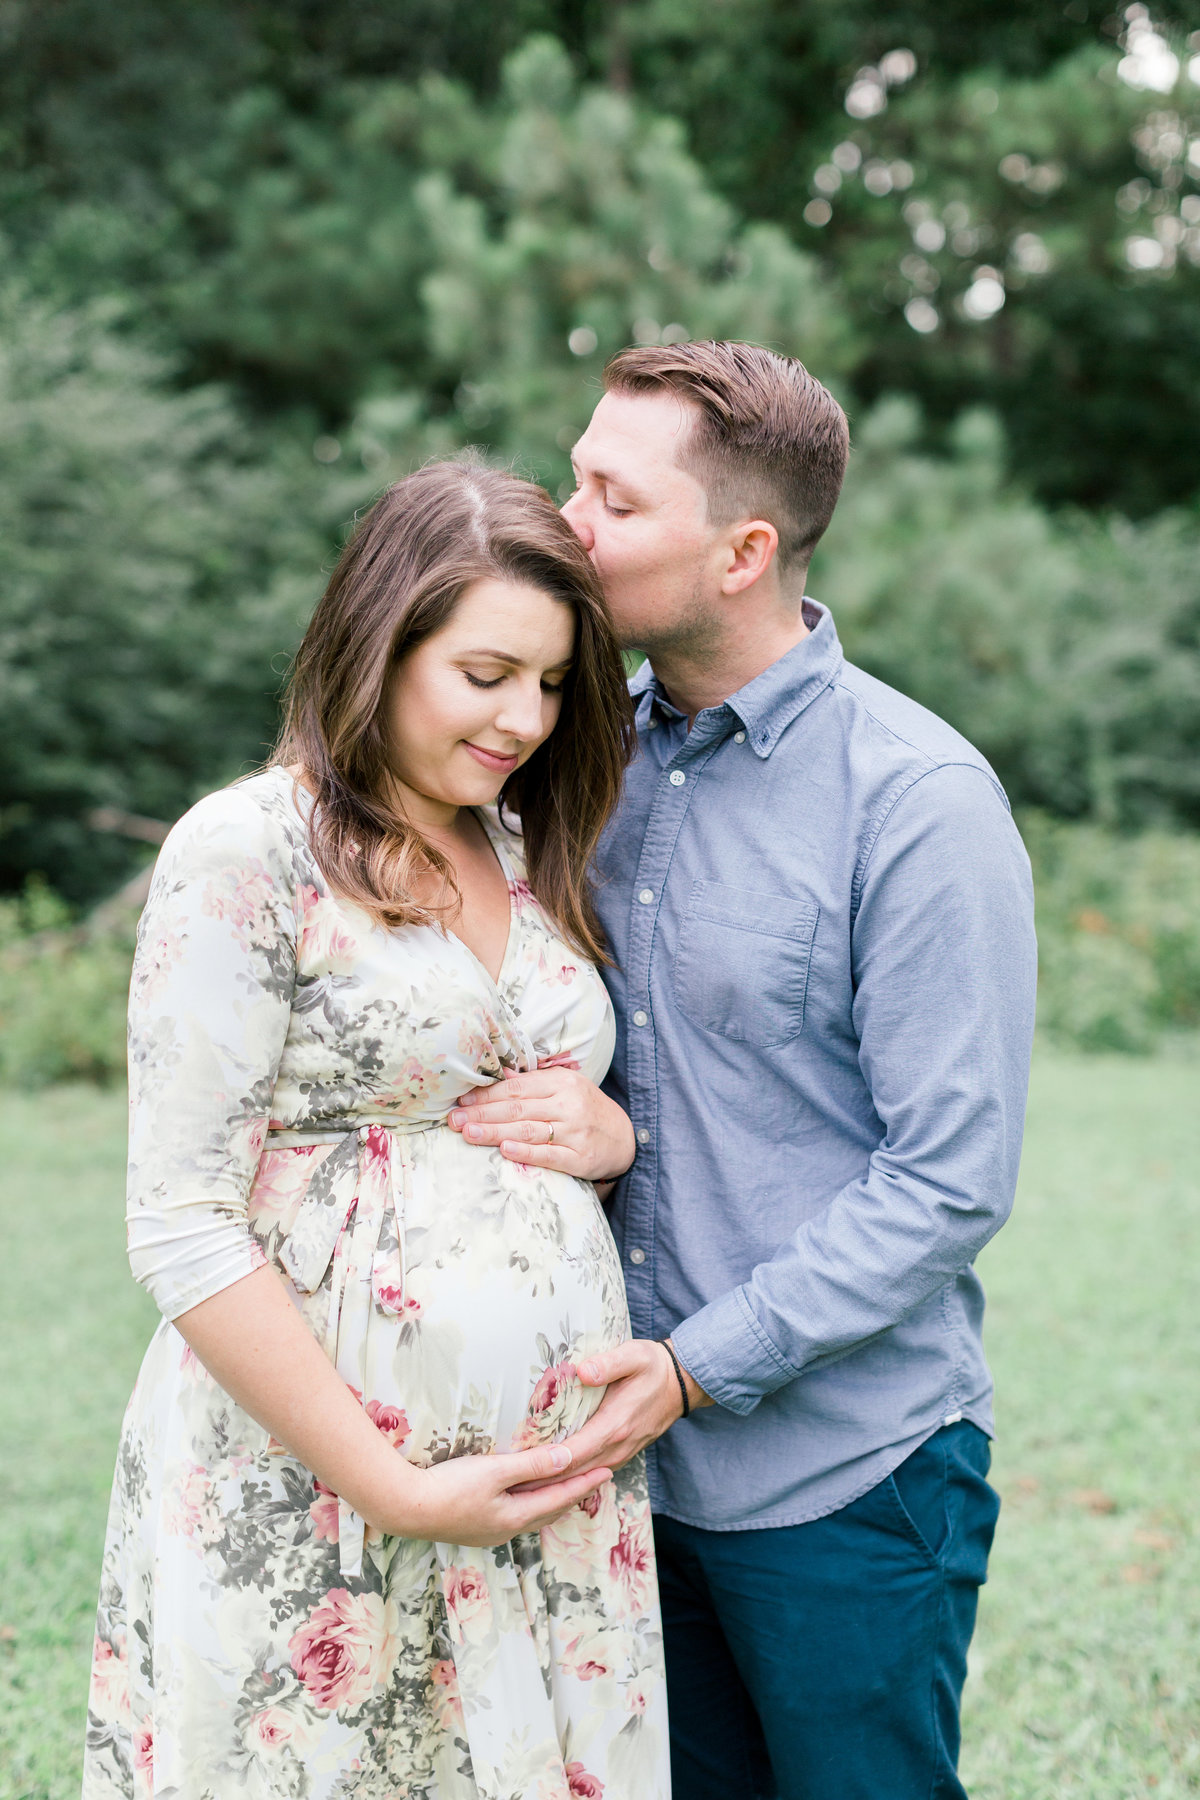 Dave and Emily-Maternity Session-Samantha Laffoon Photography-9